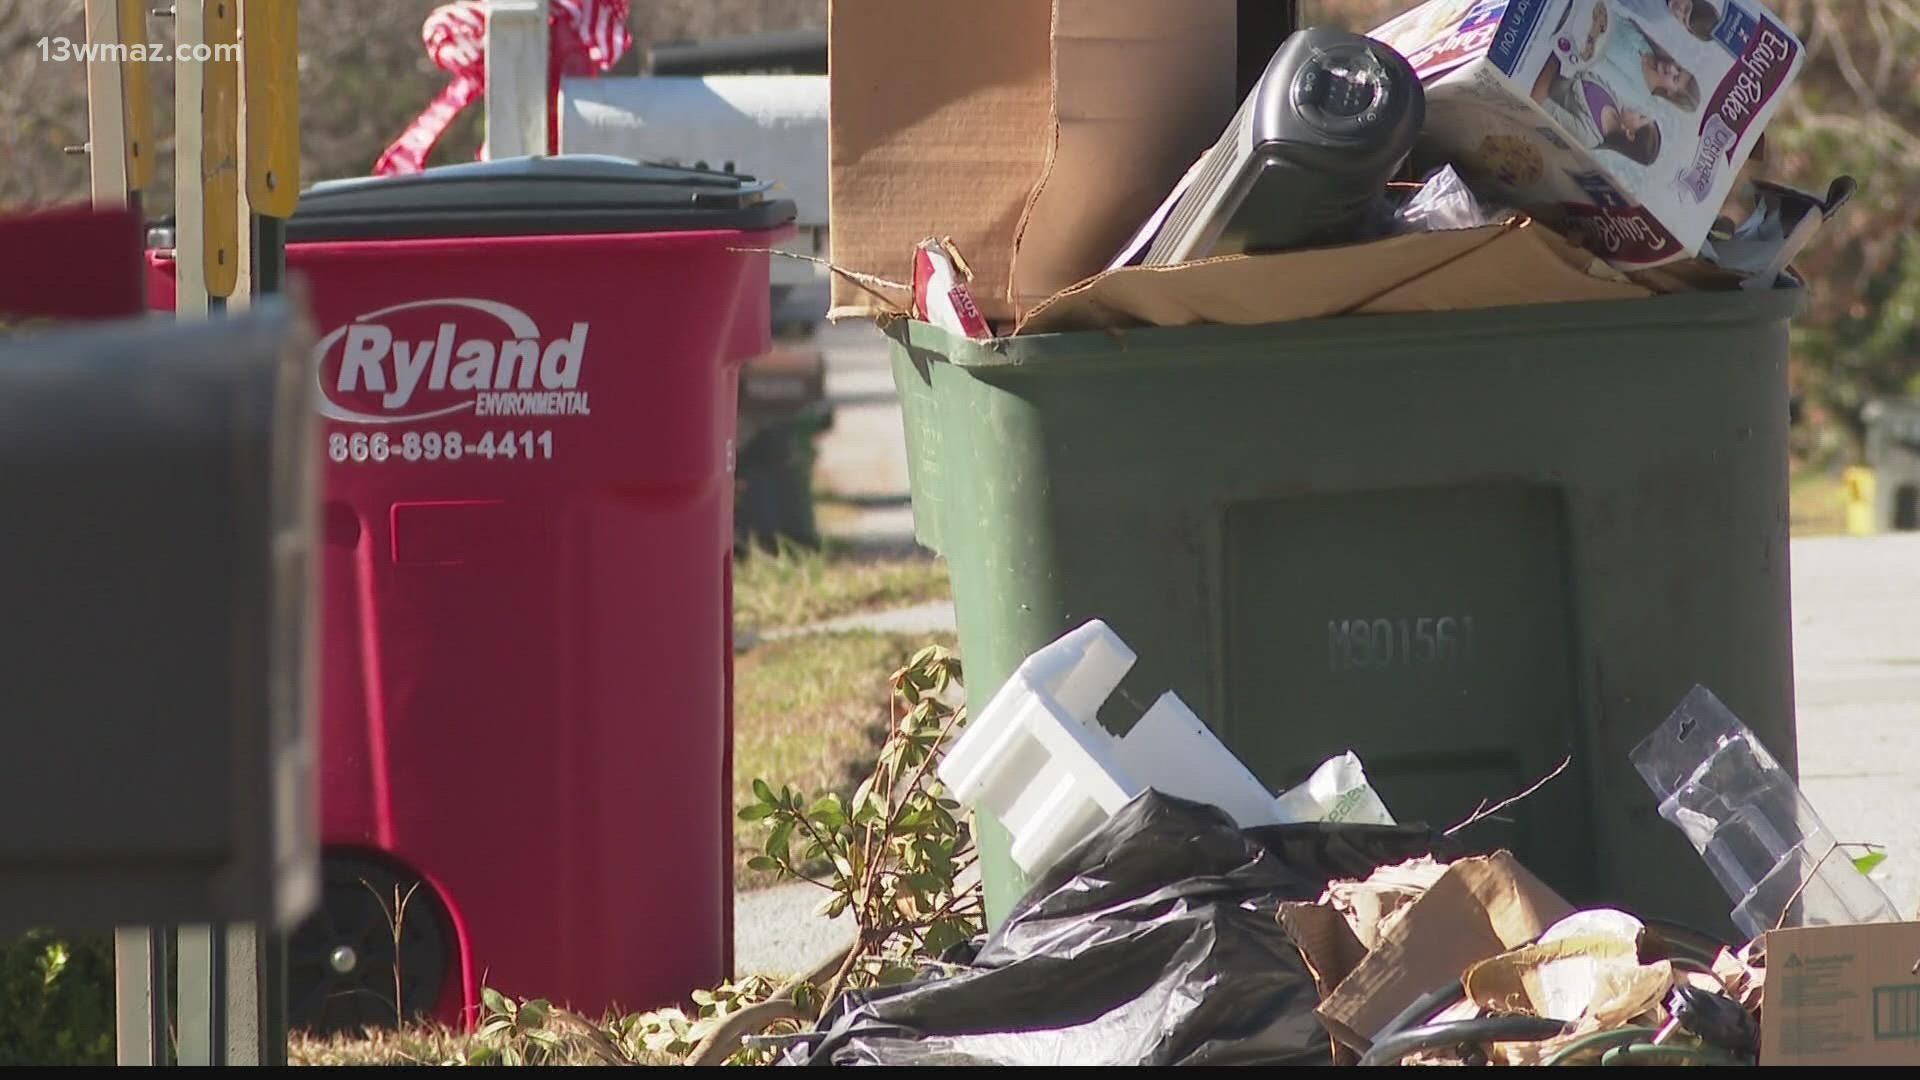 You can now dispose of your trash at 10 large dumpsters in downtown Macon every day of the week.